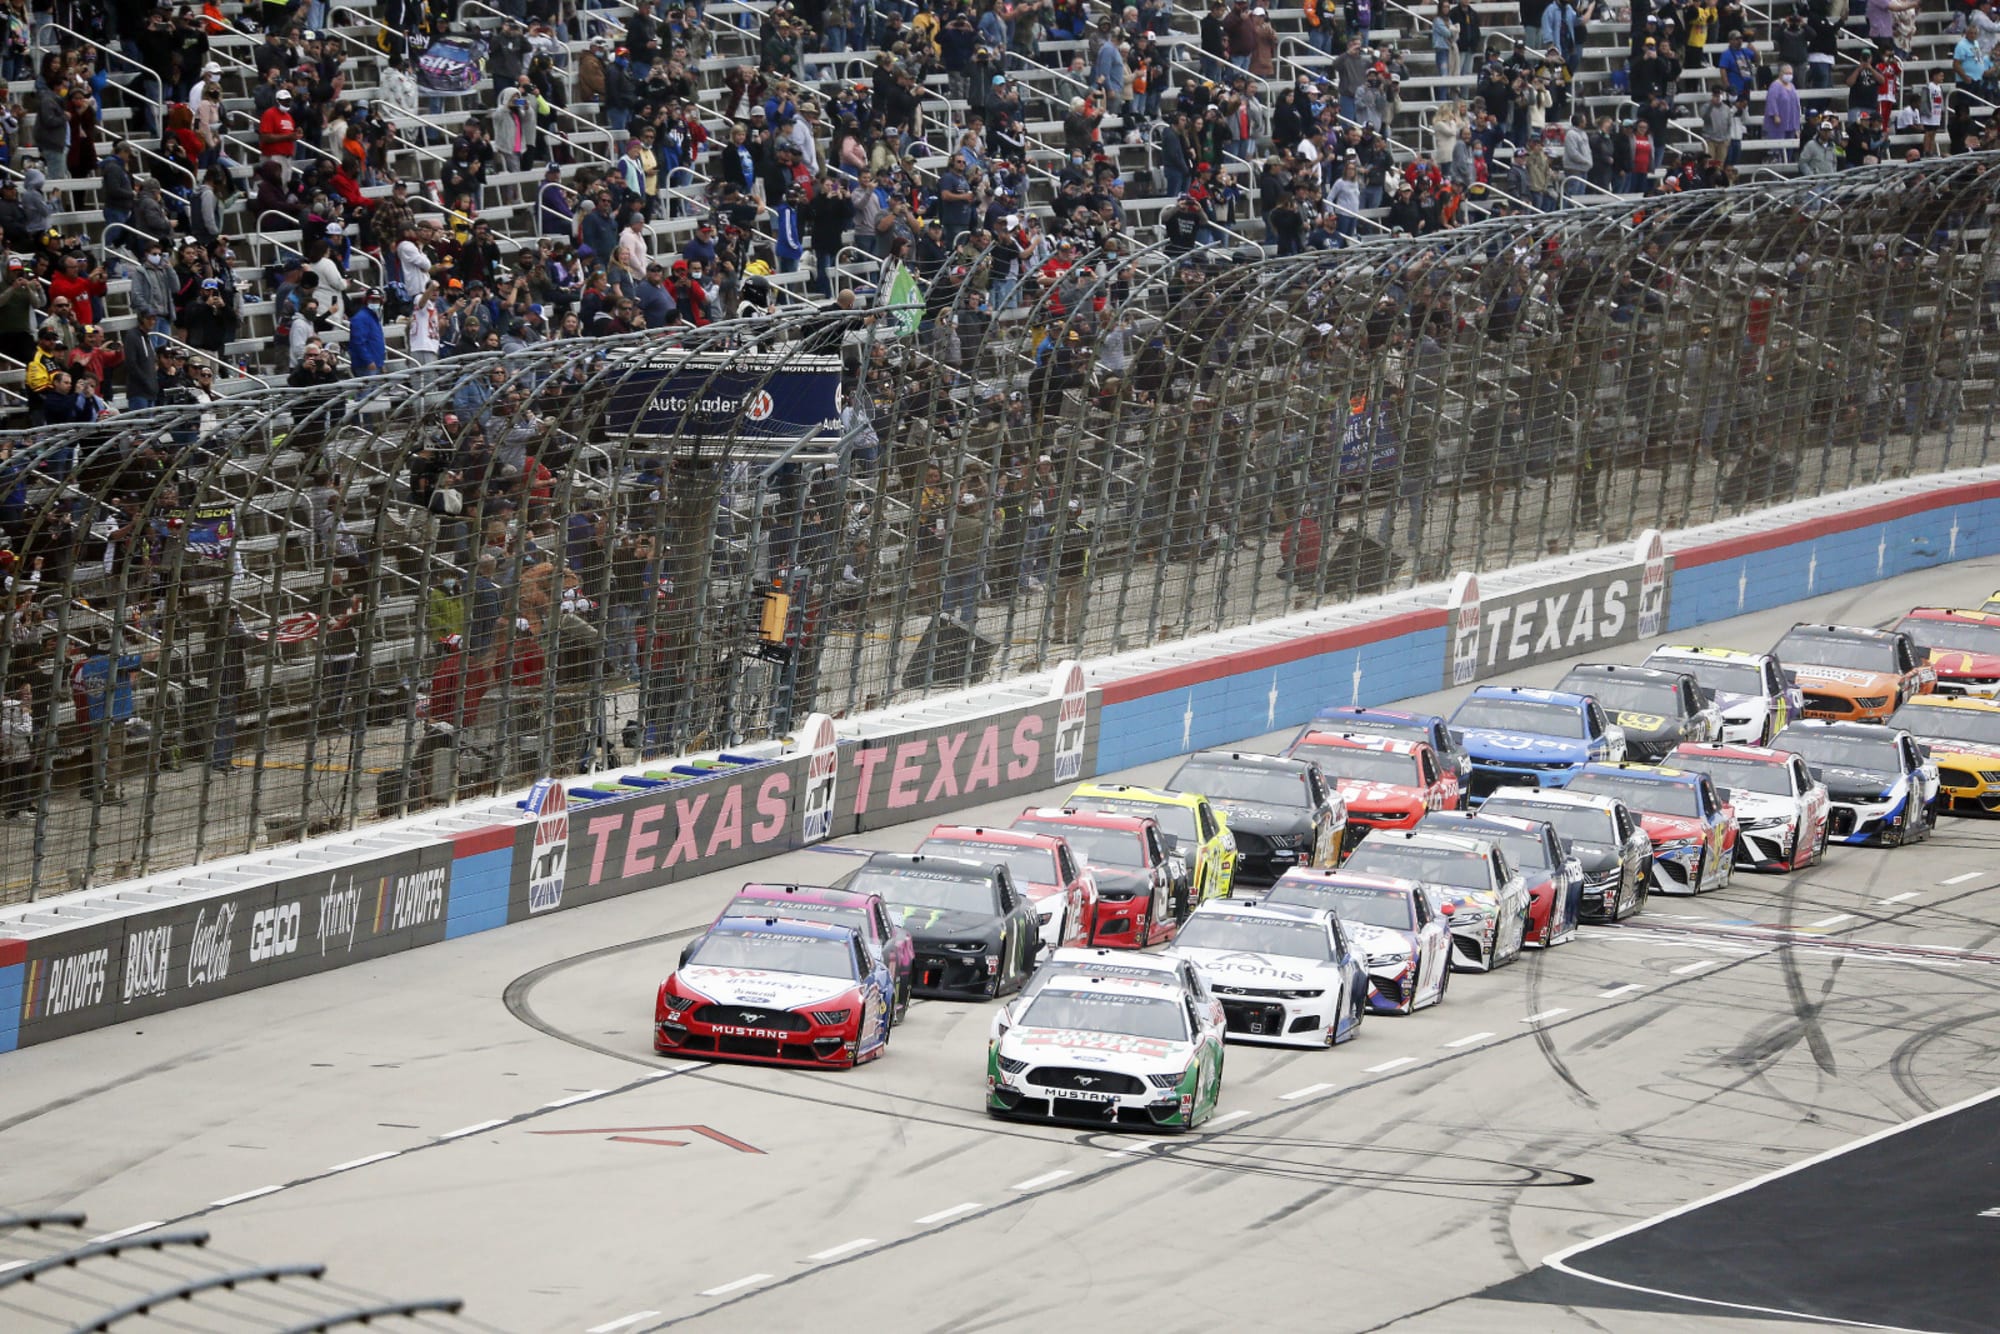 NASCAR Four contenders within just two points as Texas race resumes